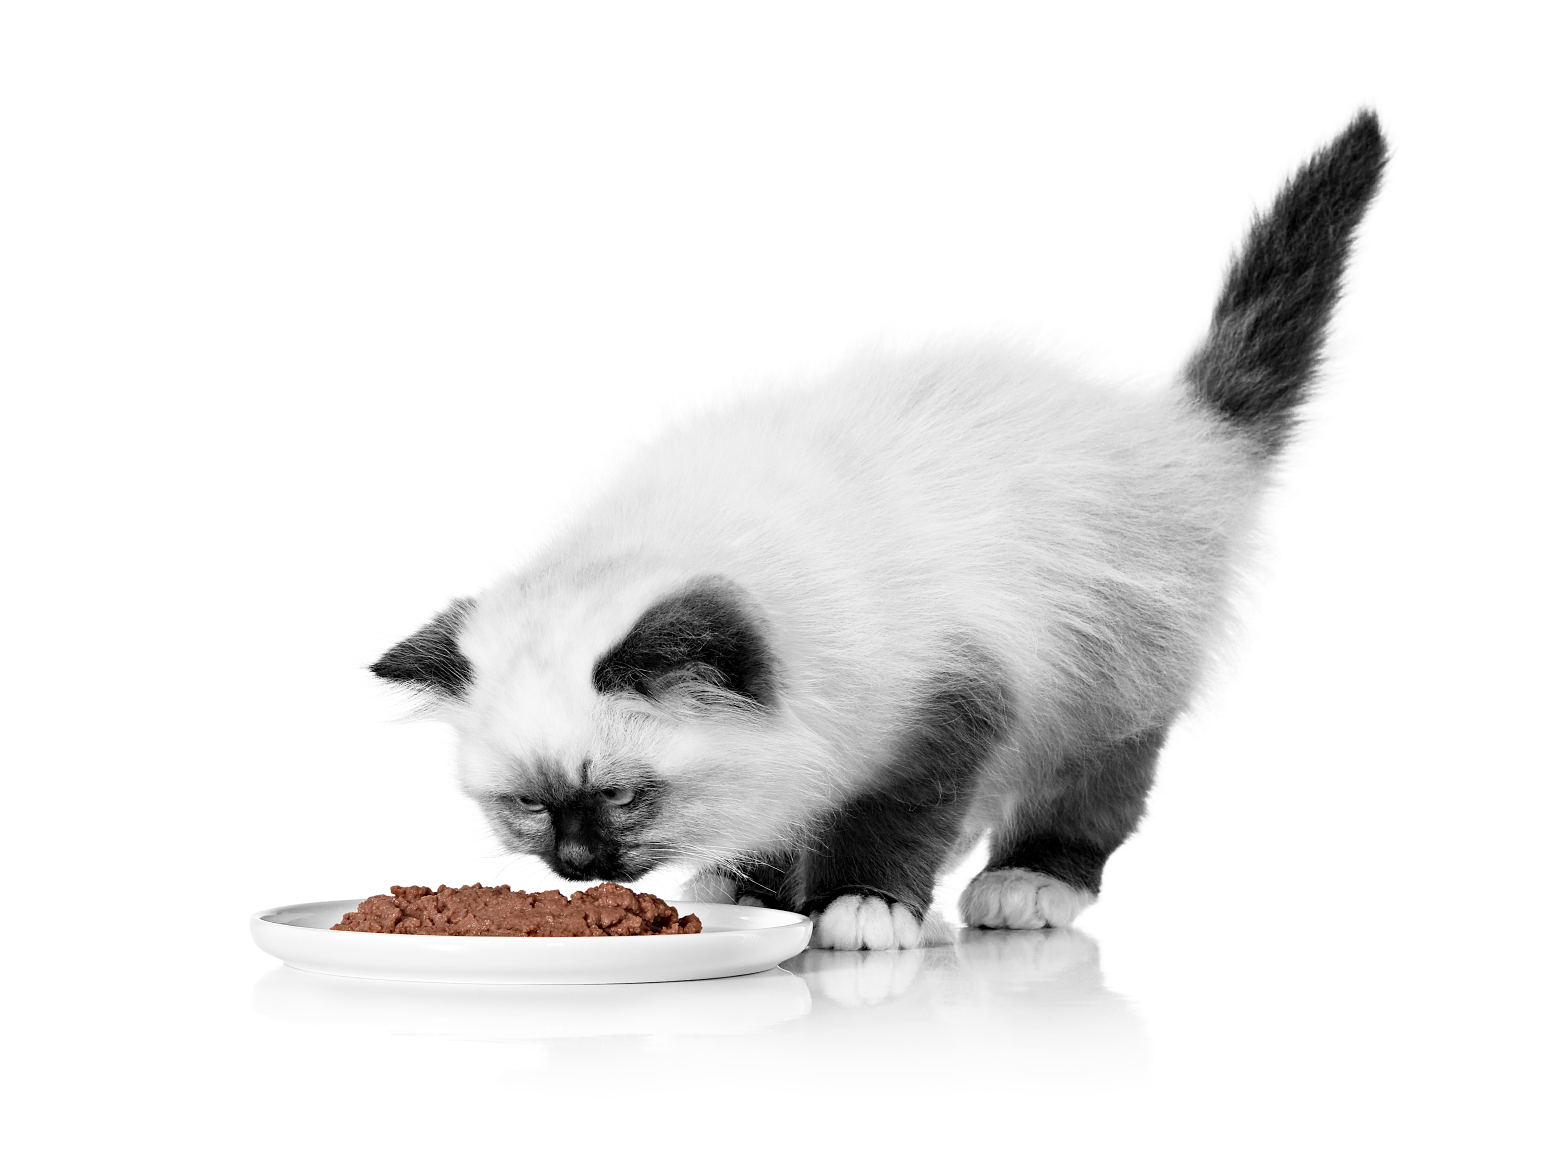 Sacred Birman kitten eating wet food in black and white on a white background